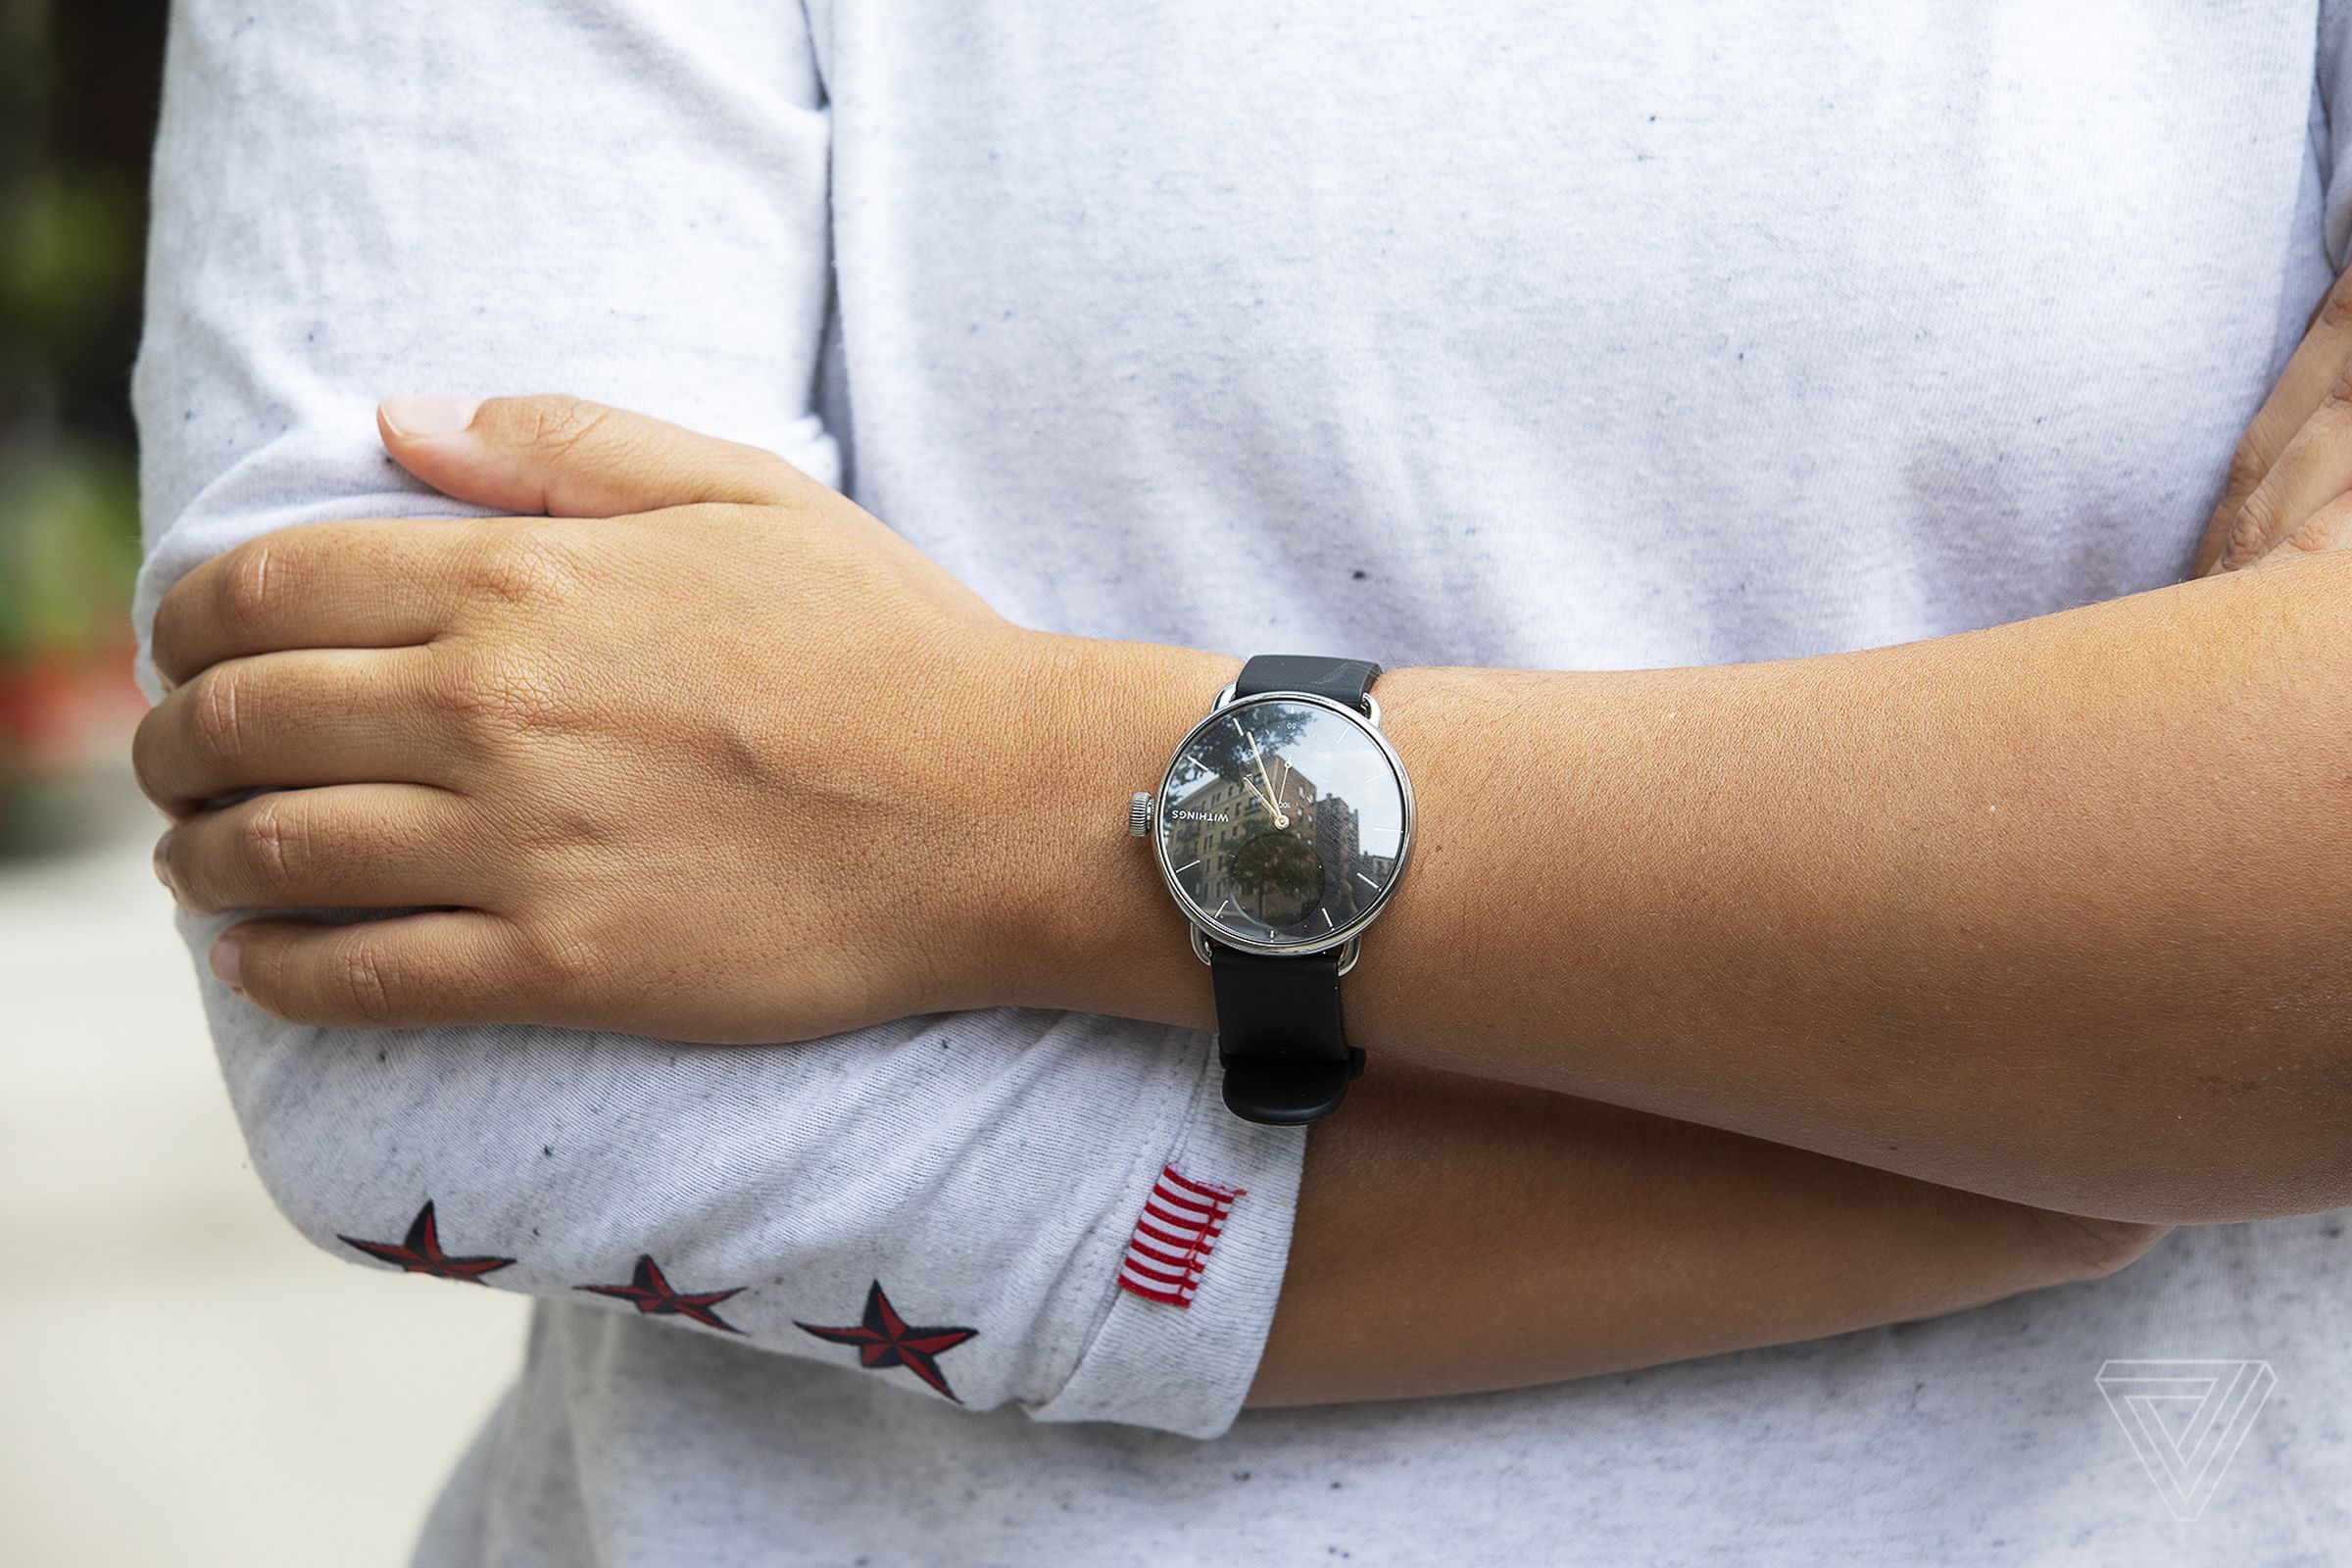 The Withings ScanWatch’s EKG feature was recently cleared by the FDA